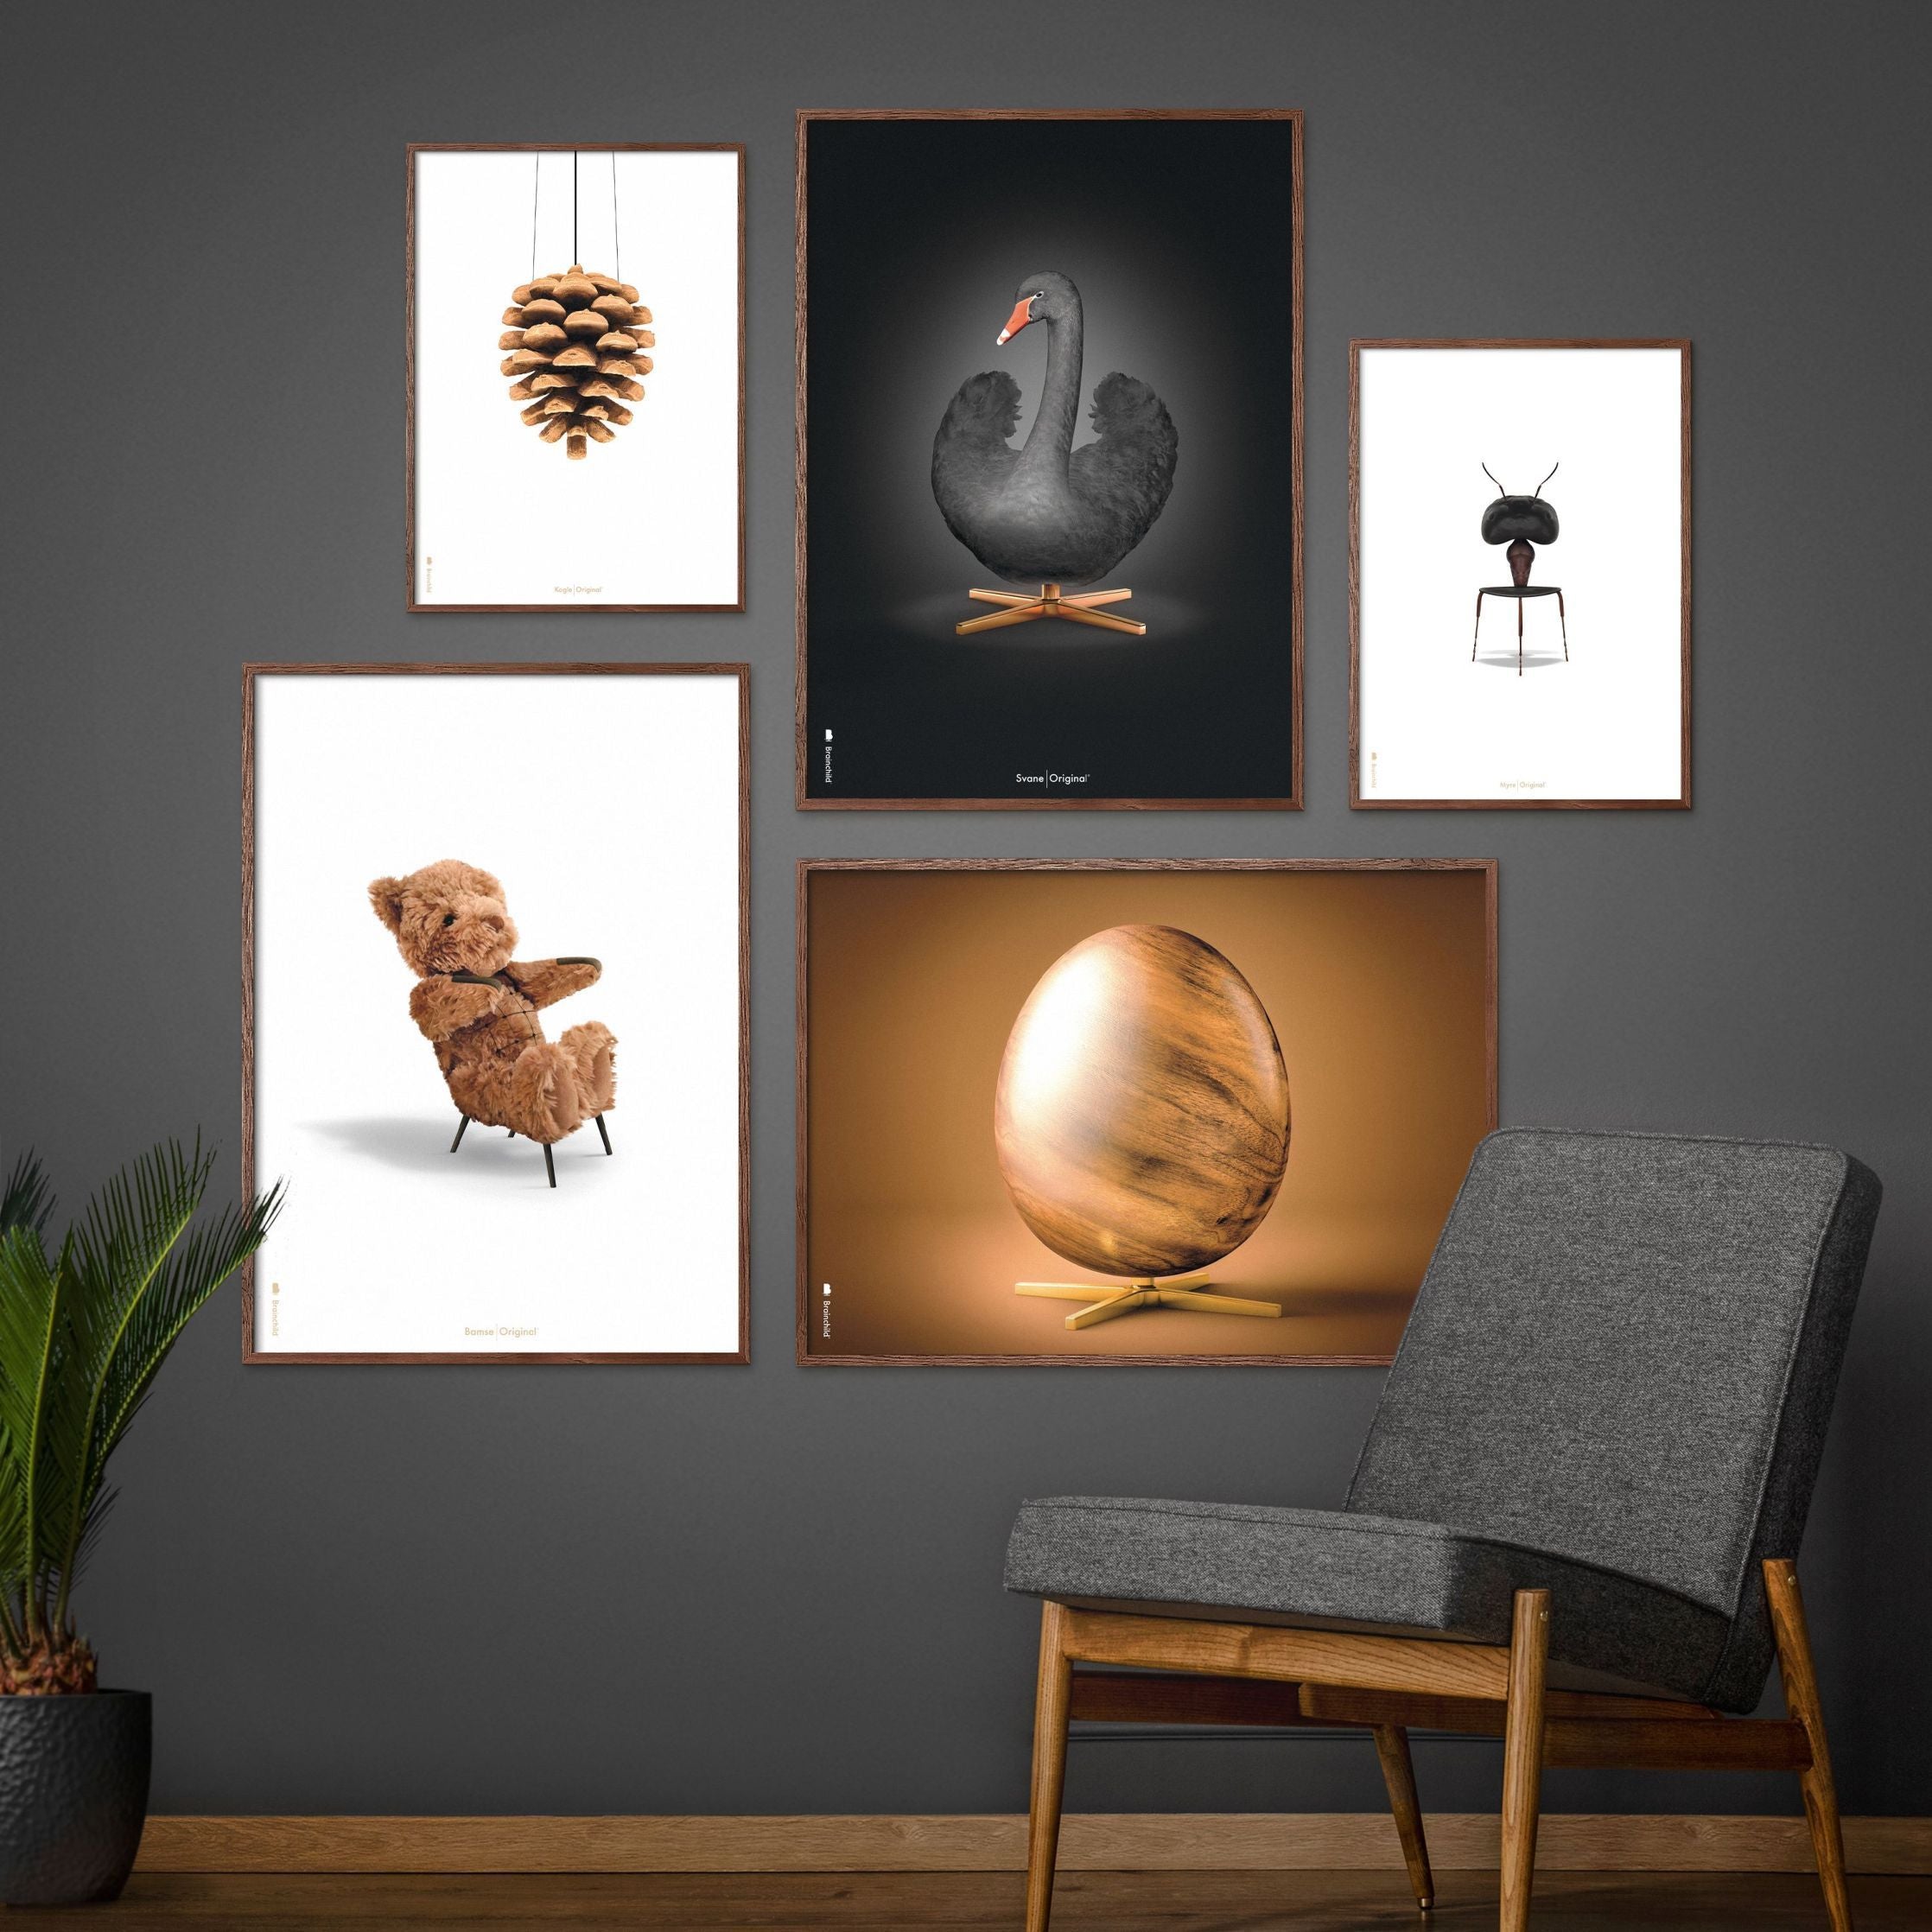 Brainchild Ant Classic Poster, Frame In Black Lacquered Wood 50x70 Cm, White Background